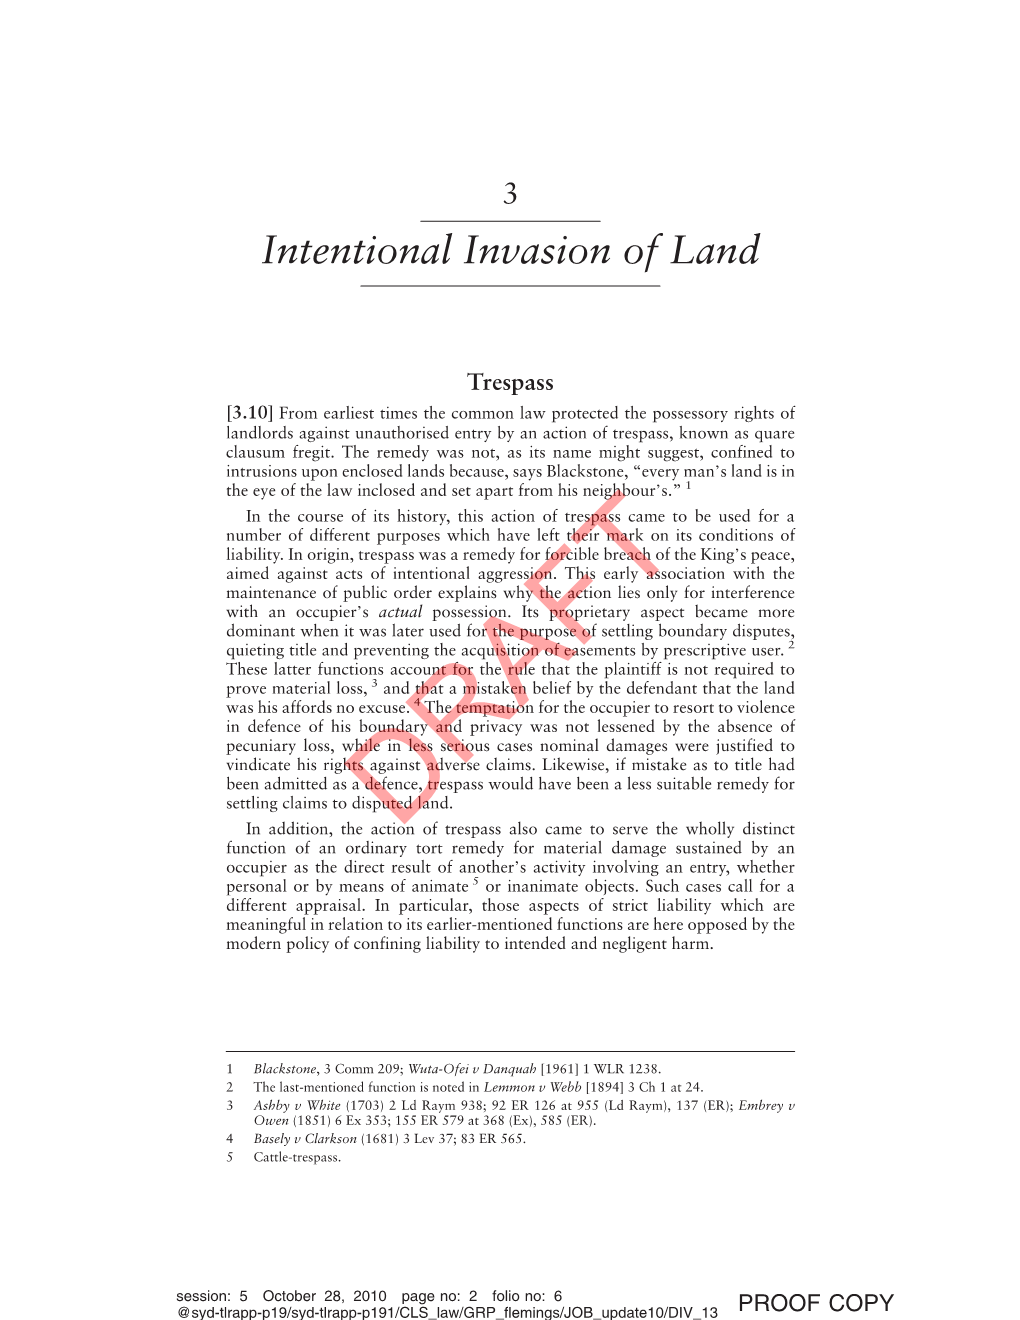 Chapter 3: Intentional Invasion of Land